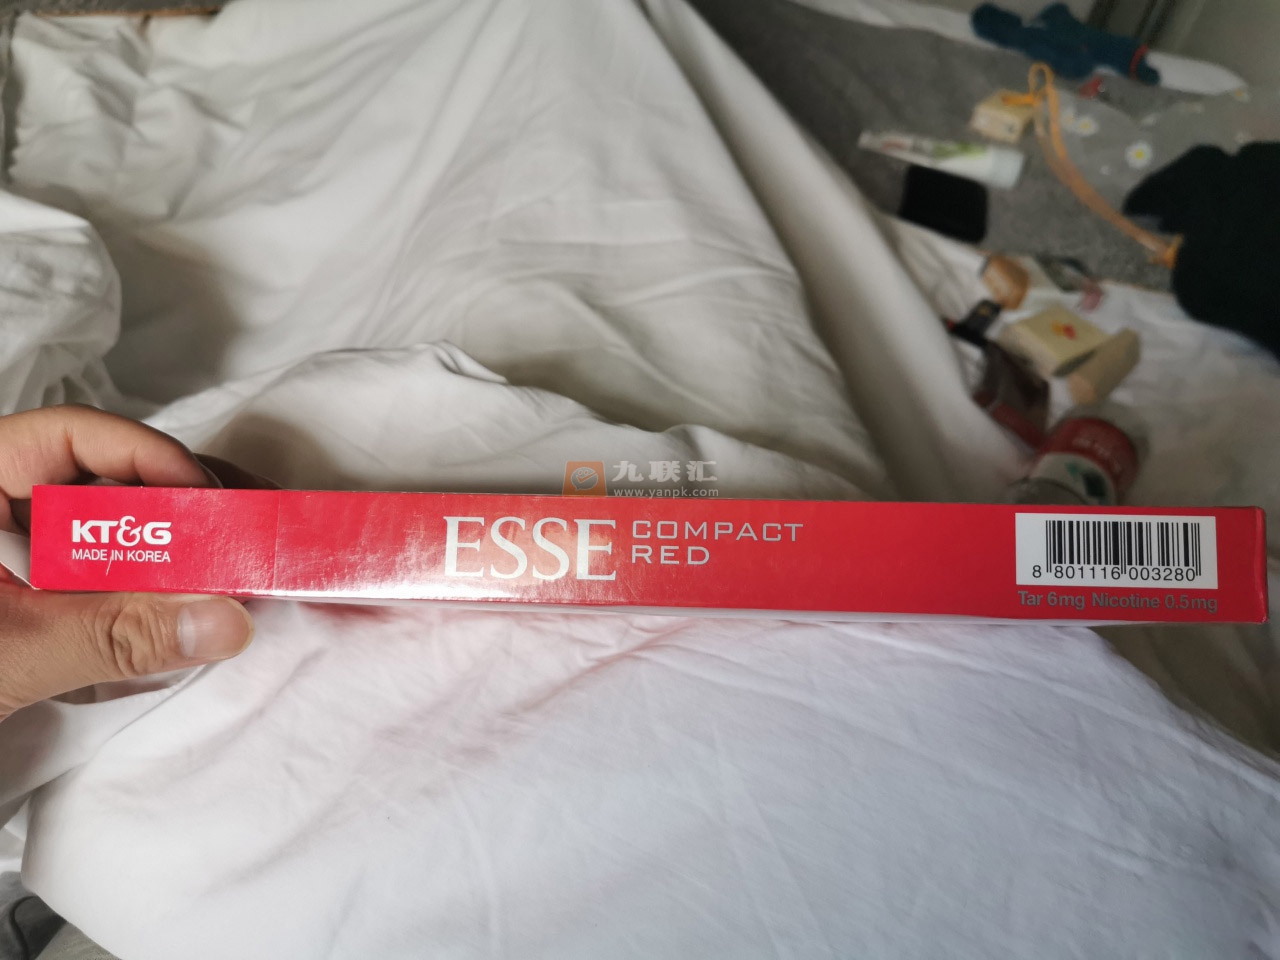 ESSE(Compact Red)相册 93036_48092